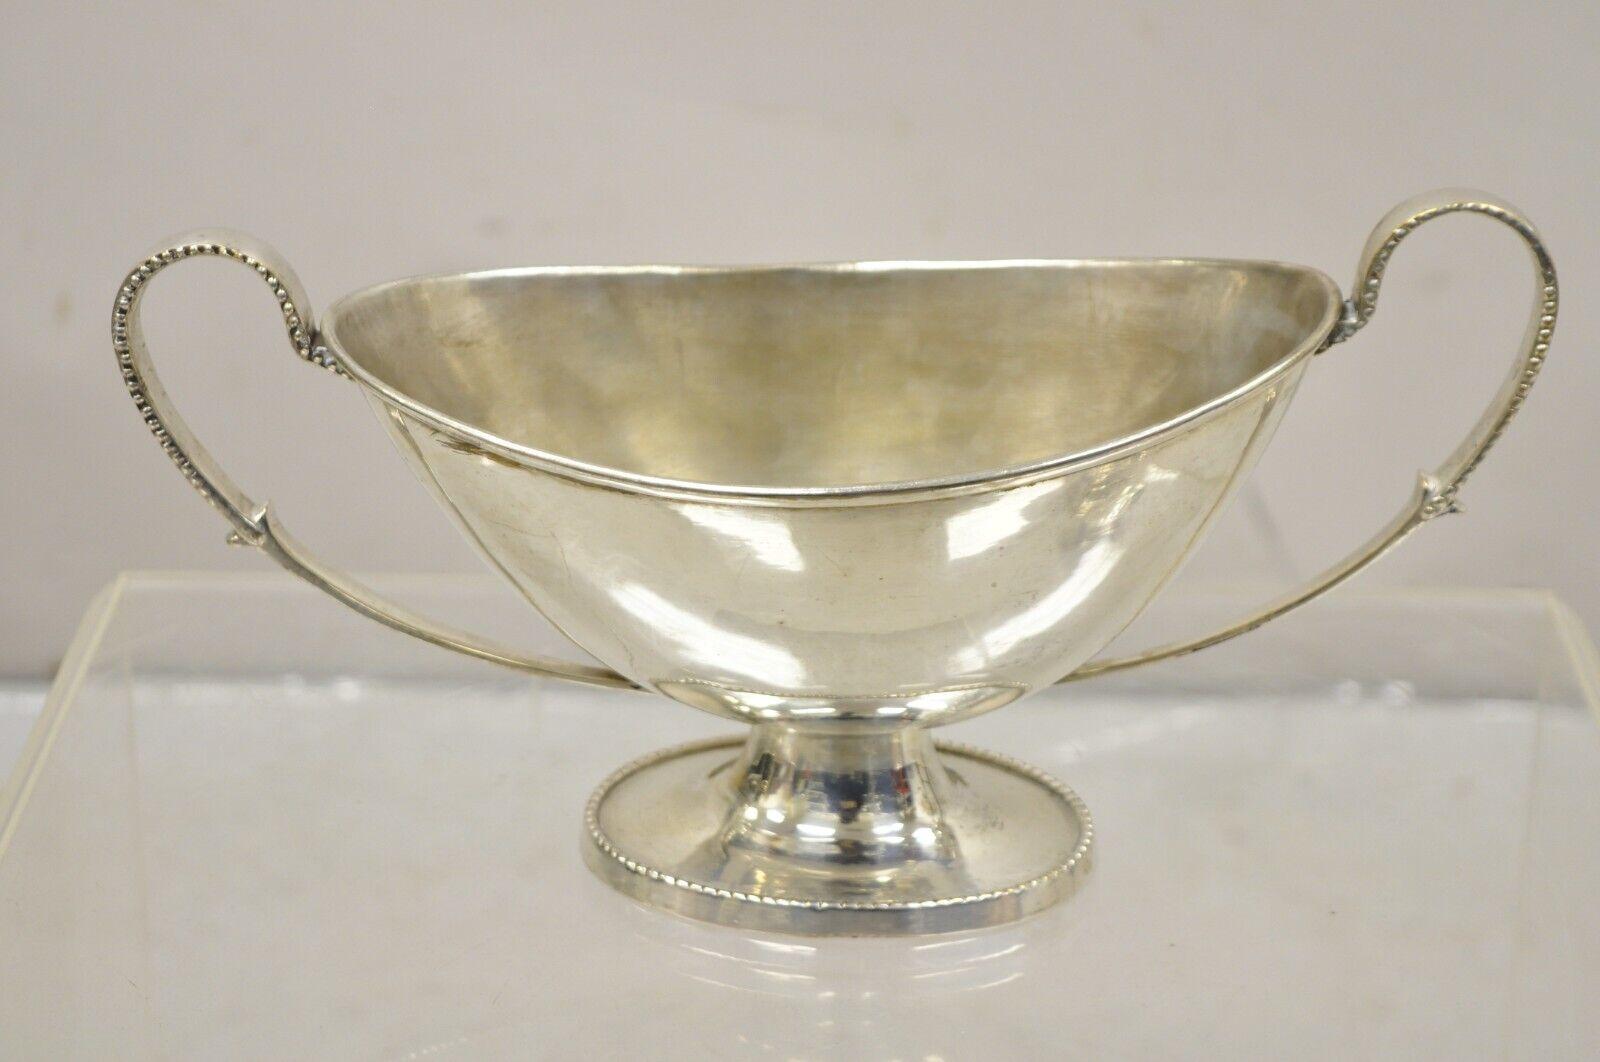 Antique English Victorian Silver Plated Trophy Cup Small Candy Dish Fruit Bowl In Good Condition For Sale In Philadelphia, PA